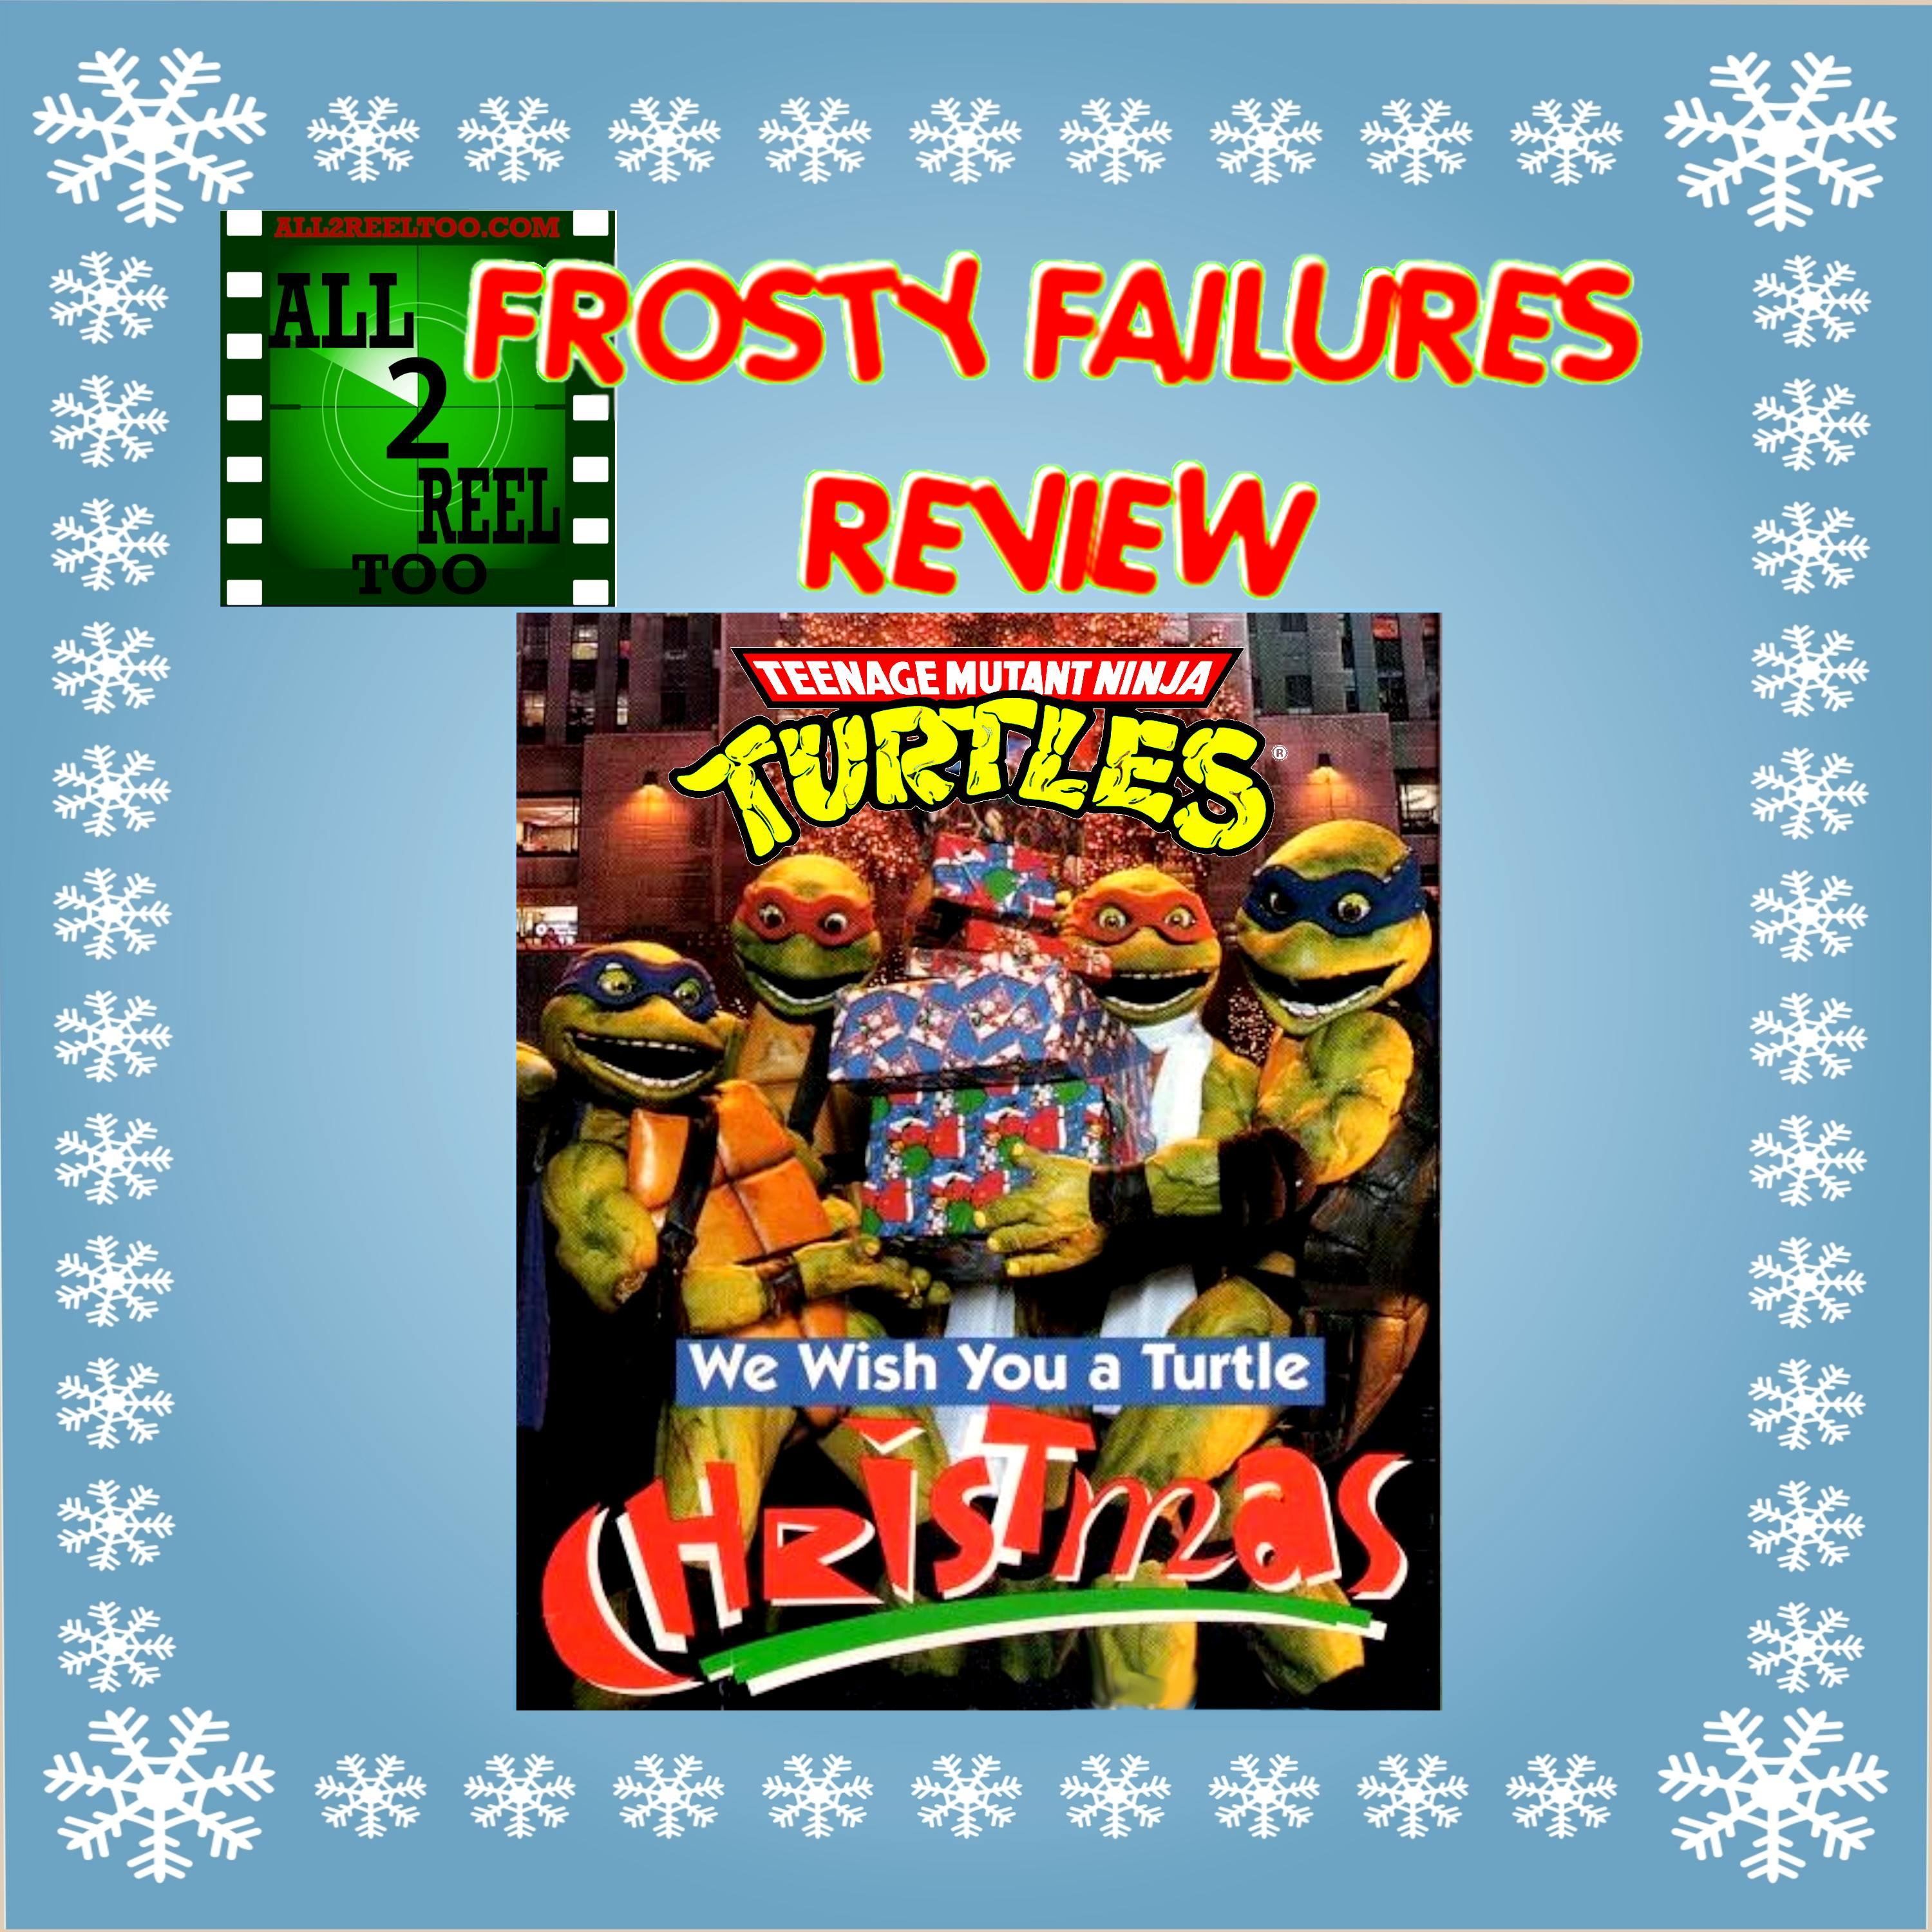 TMNT: We Wish You a Turtle Christmas (1994) - FROSTY FAILURES REVIEW